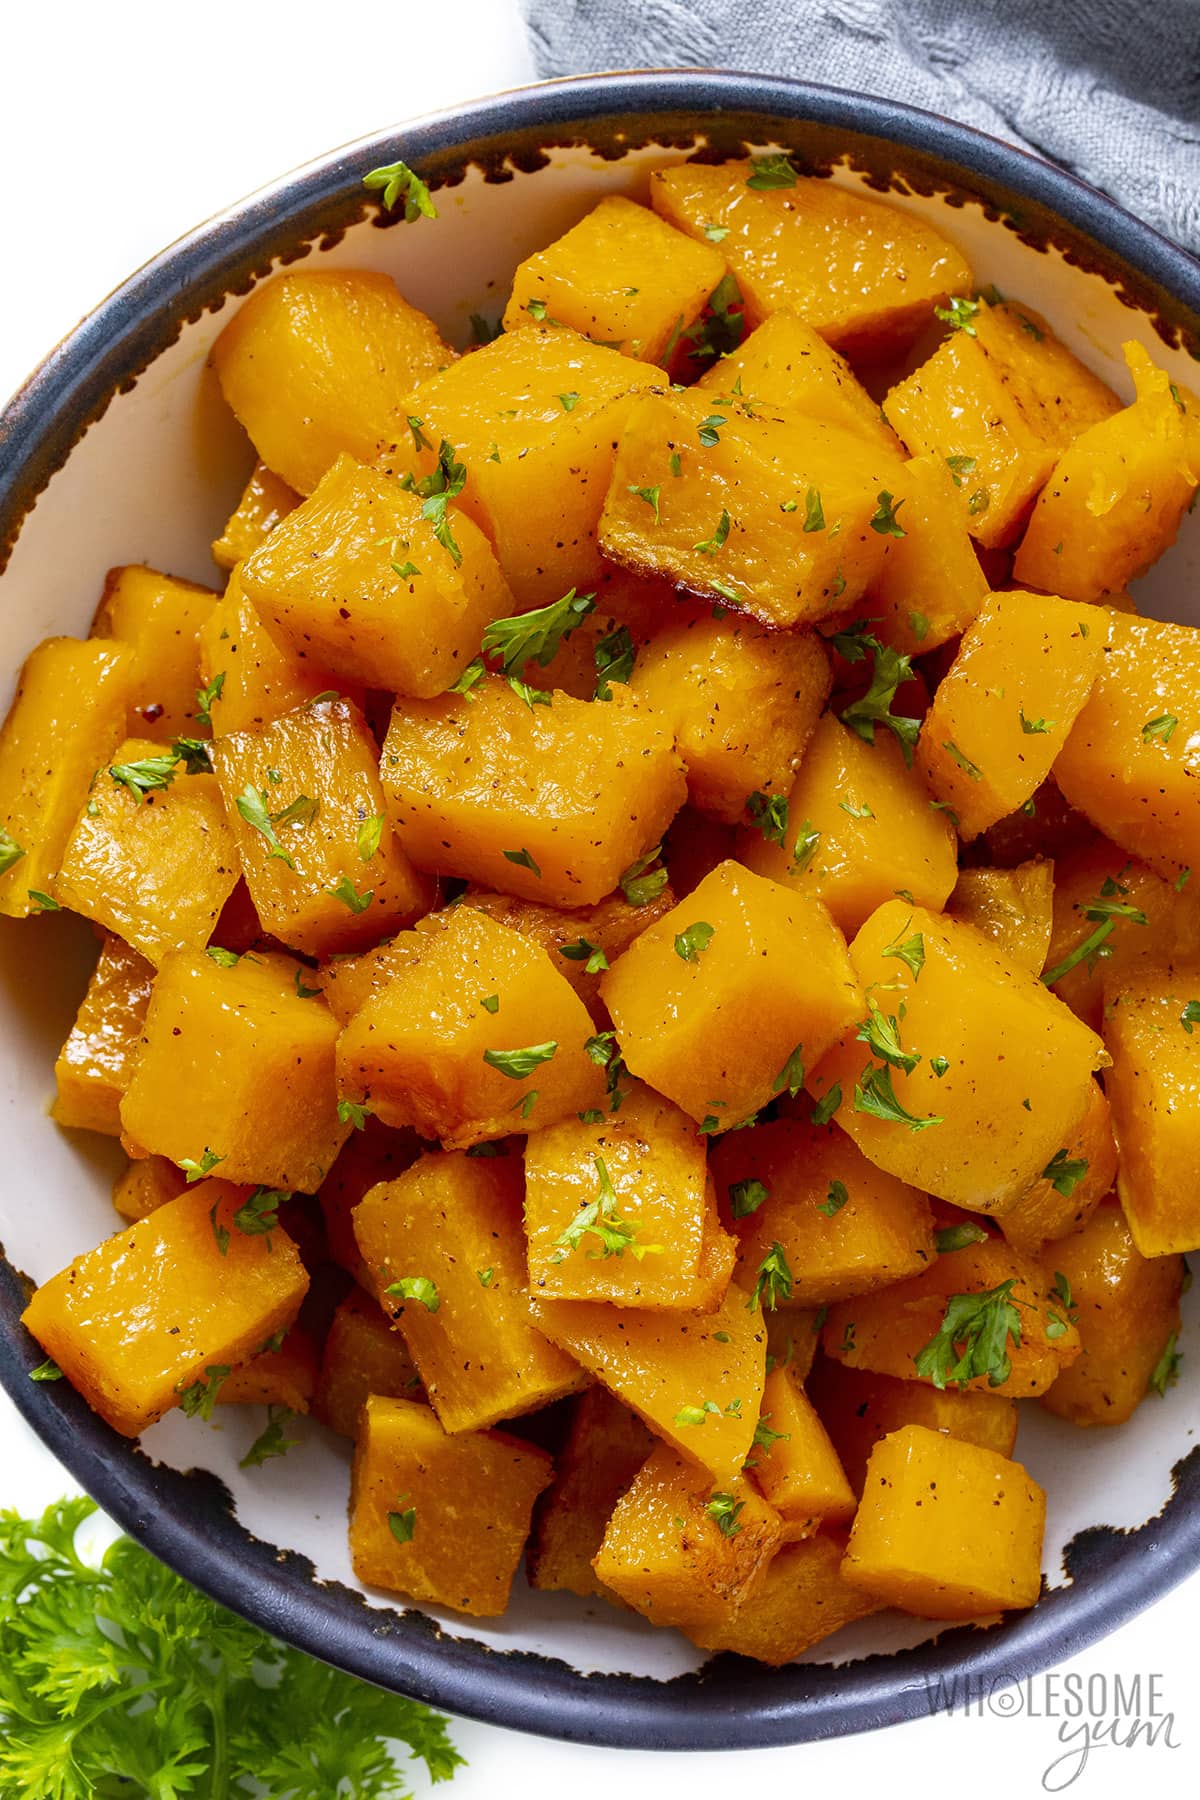 Oven roasted butternut squash in a bowl.